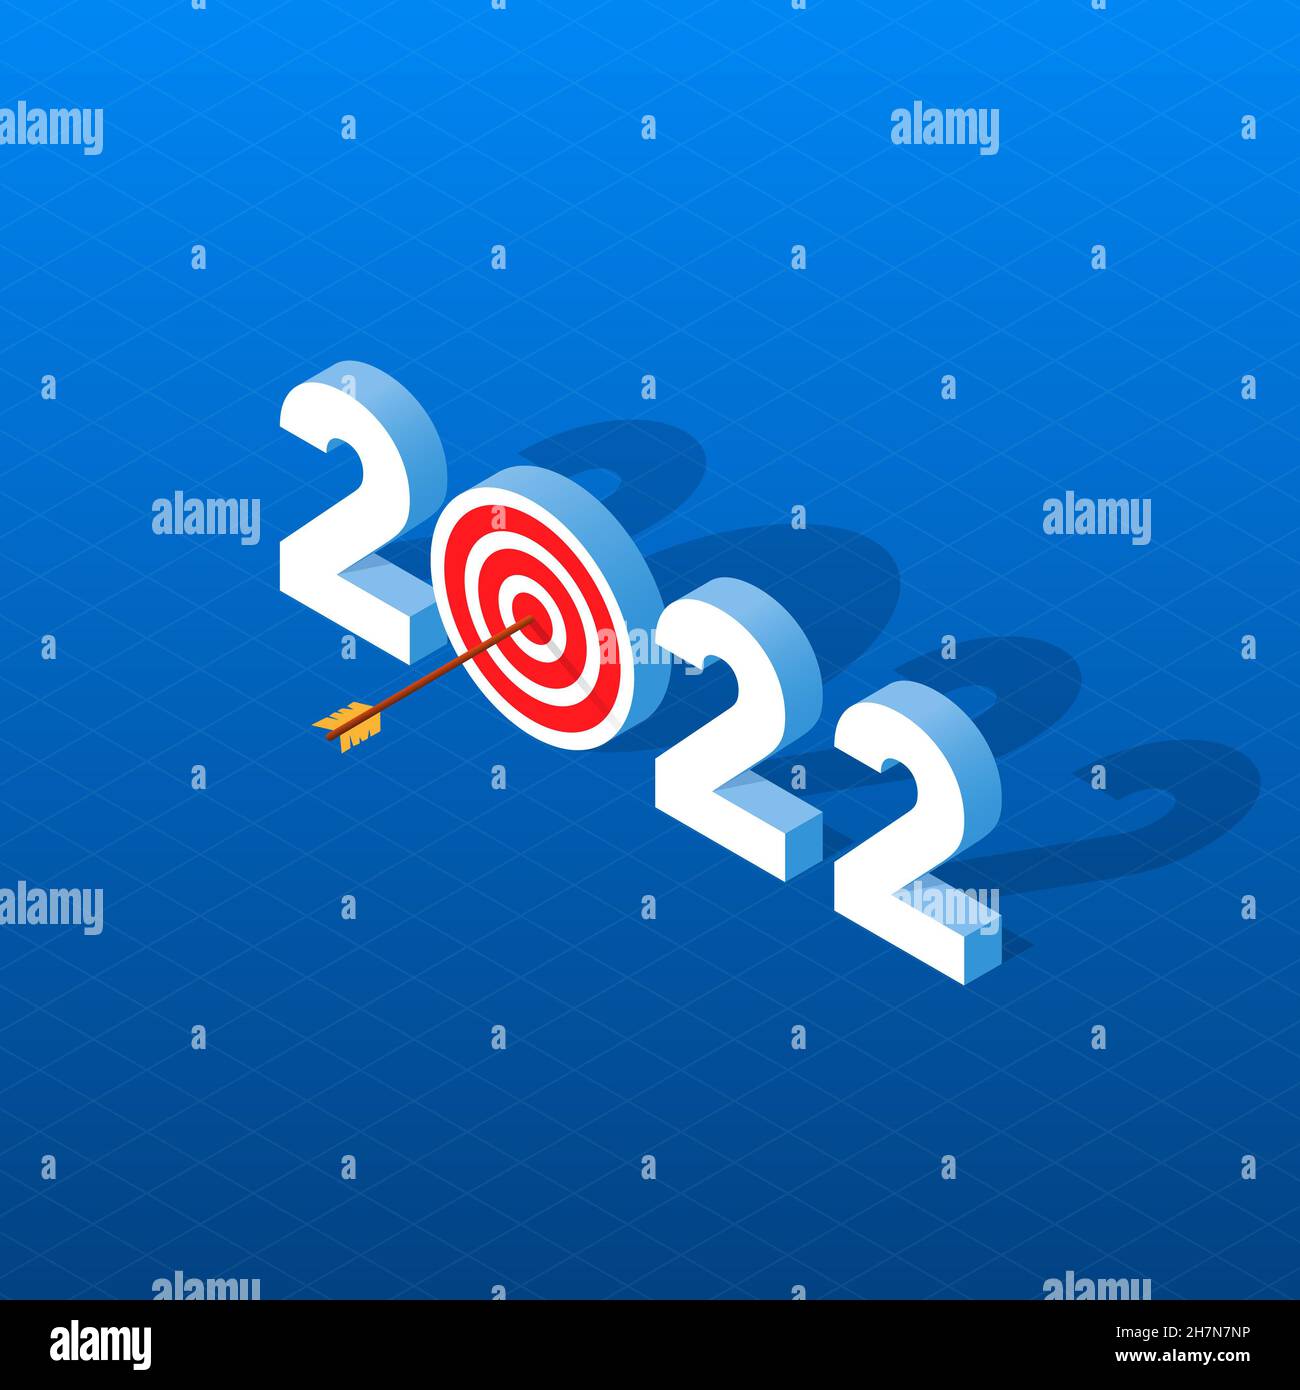 New Year 2022 image concept of success and new year goals. An arrow hit the center of the target. Stock Photo